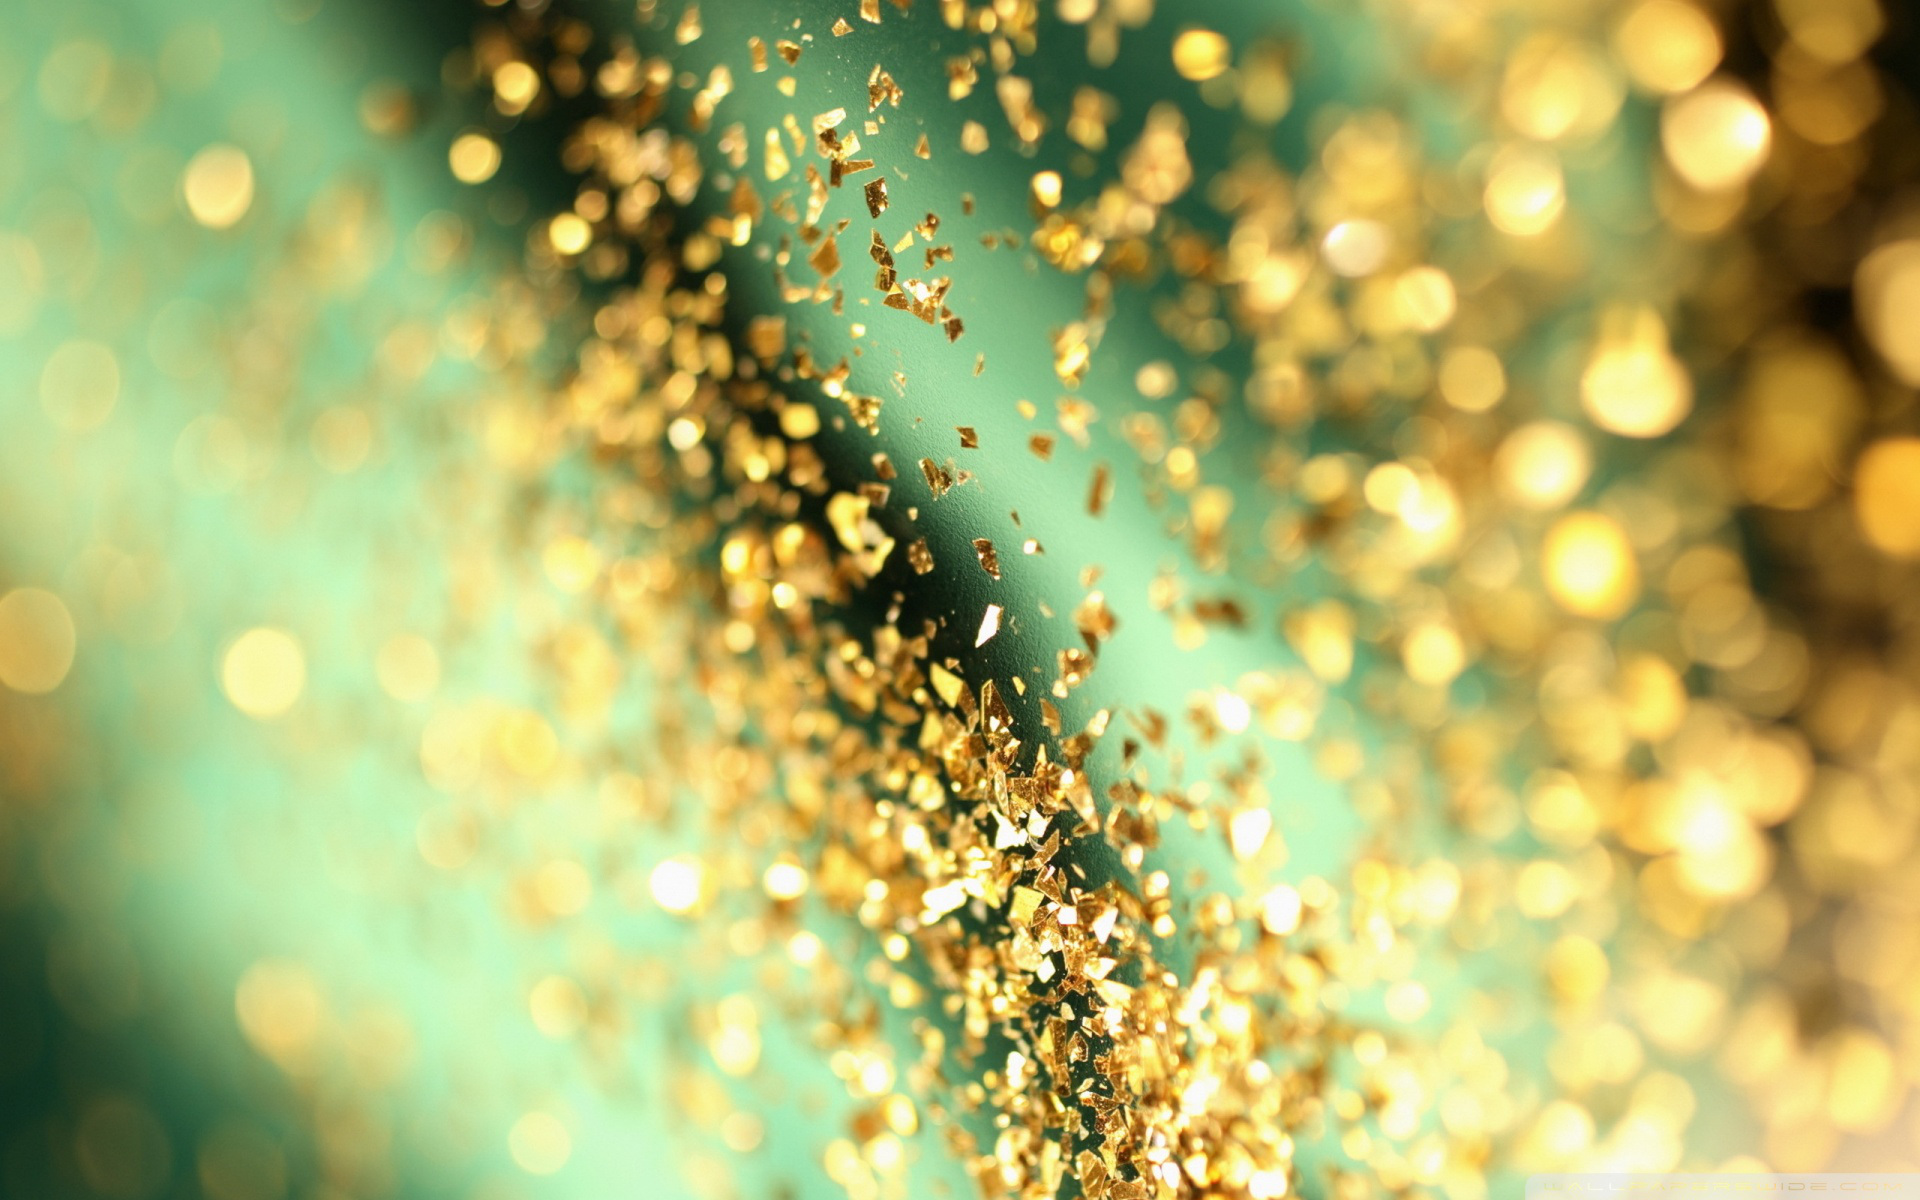 Mint Green And Gold Glitter Background - 1920x1200 Wallpaper 